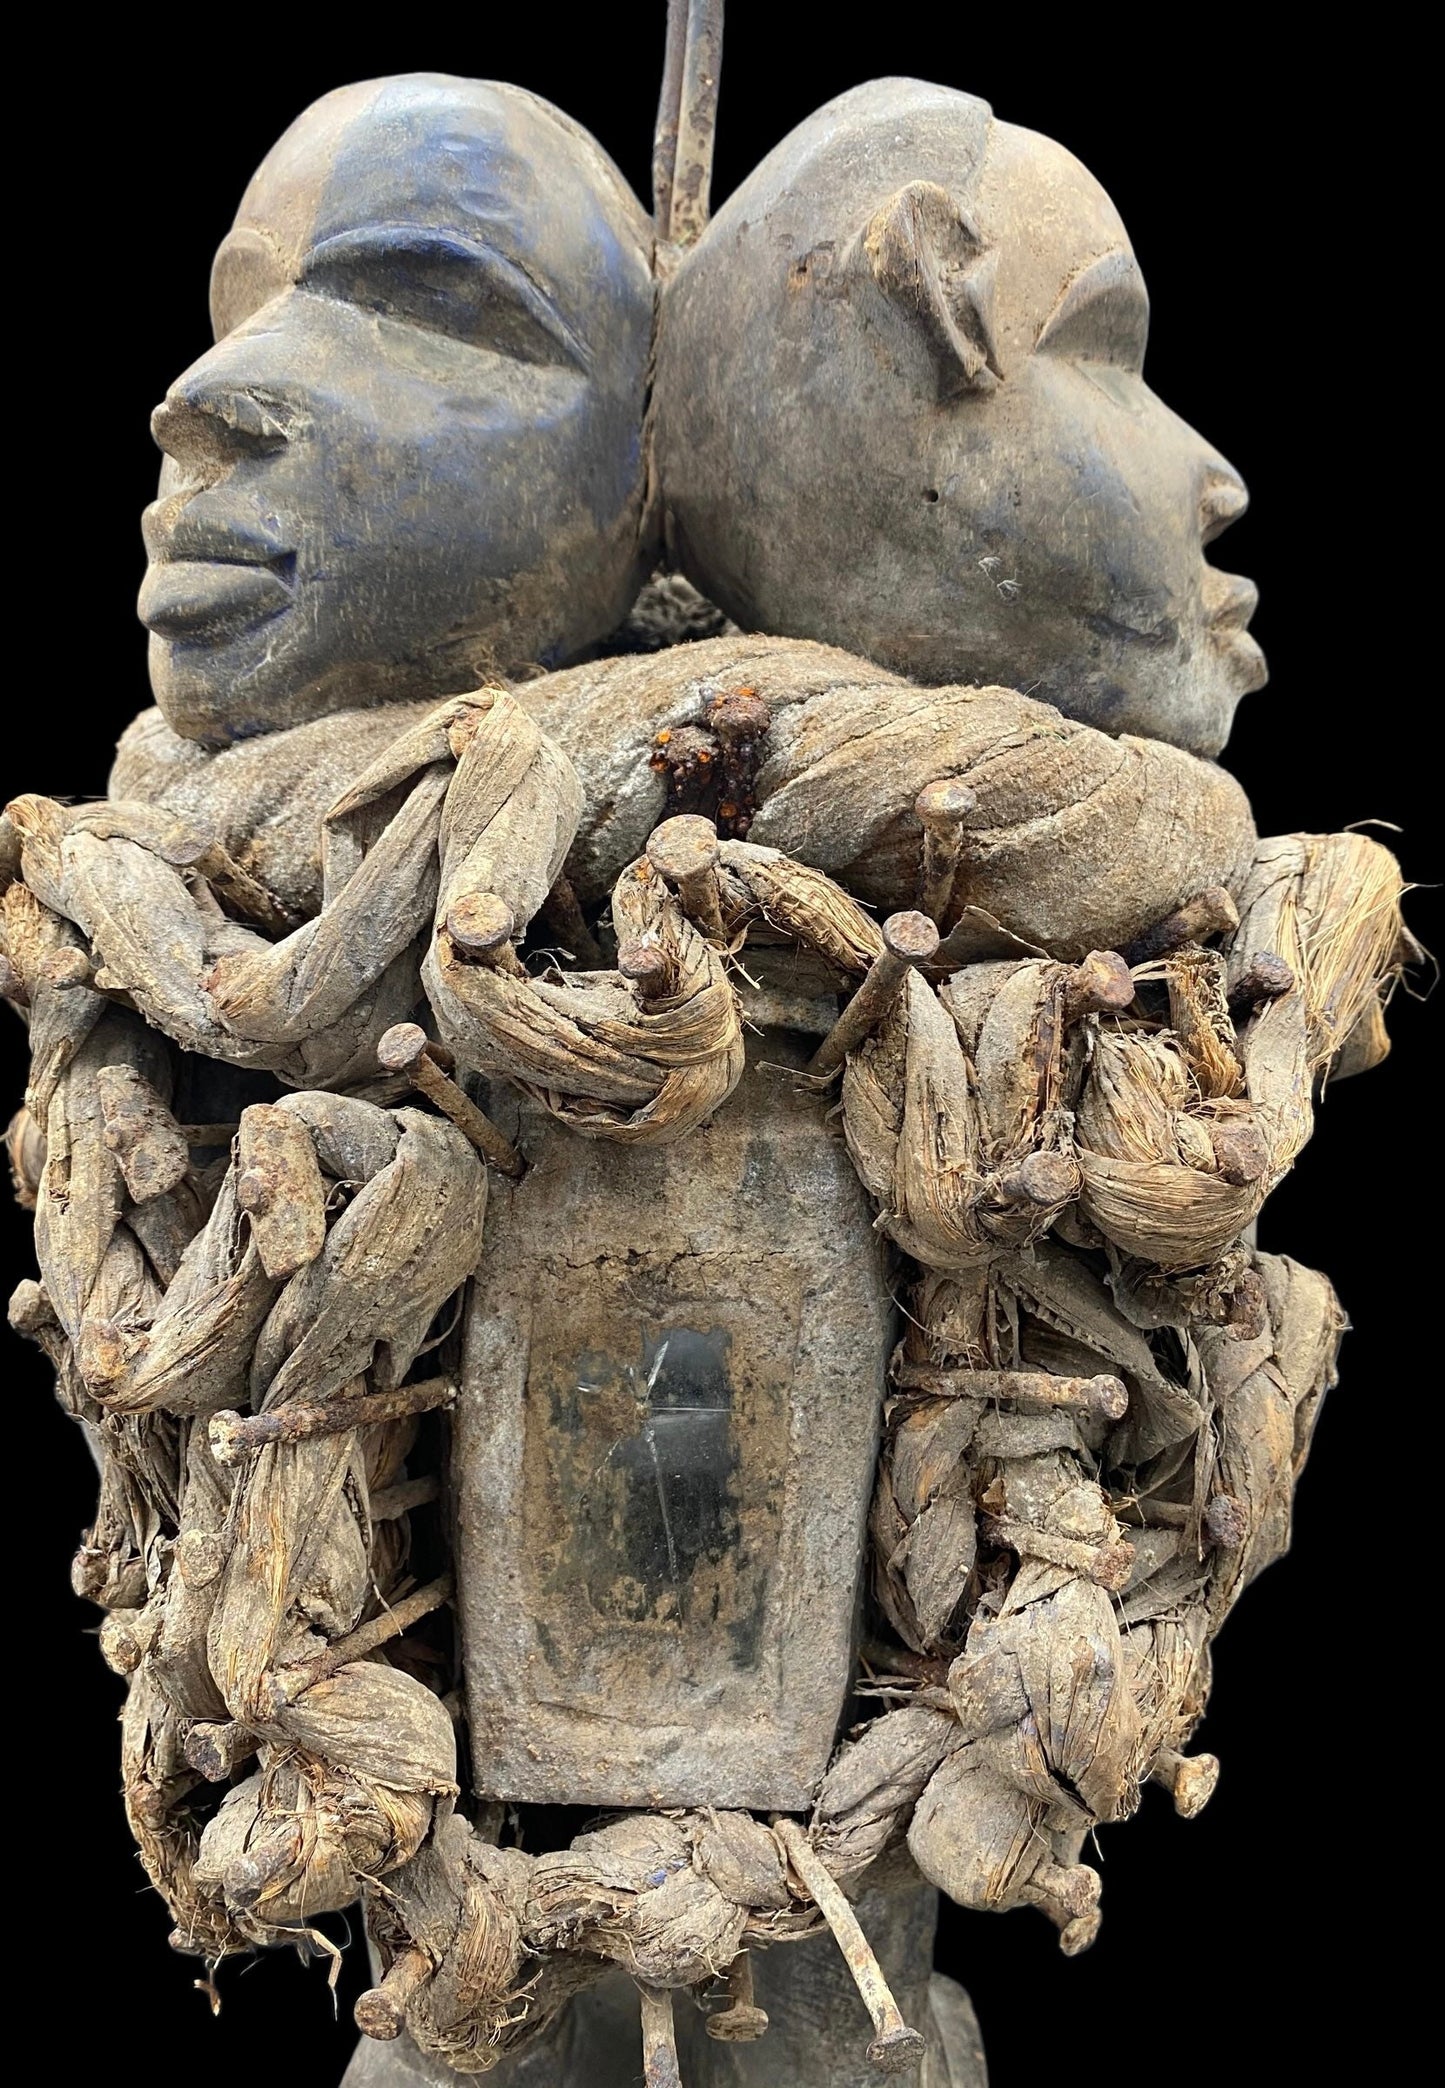 Last One! Large Nkisi Two-Headed Statue with Glass + Nkondi + Shigidi + Fetish from Kongo for Protection + One of a Kind